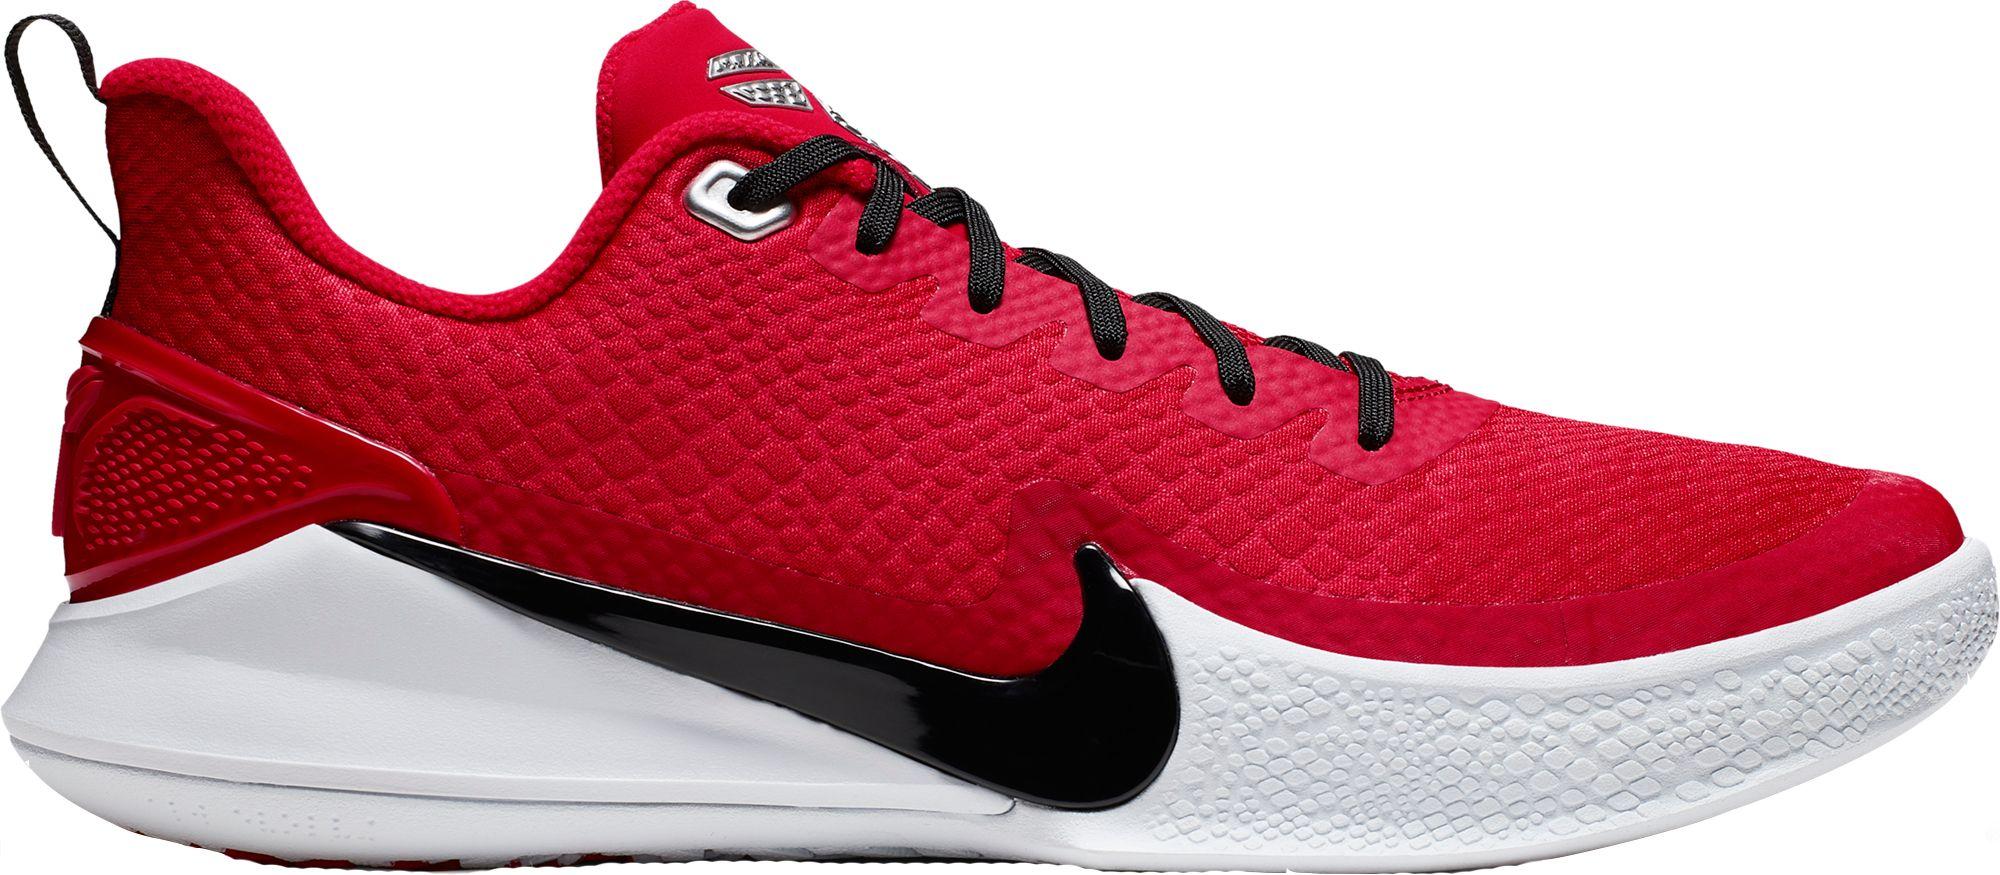 Nike Mamba Focus Basketball Shoes in University Red/Black/White/Metal (Red)  - Lyst